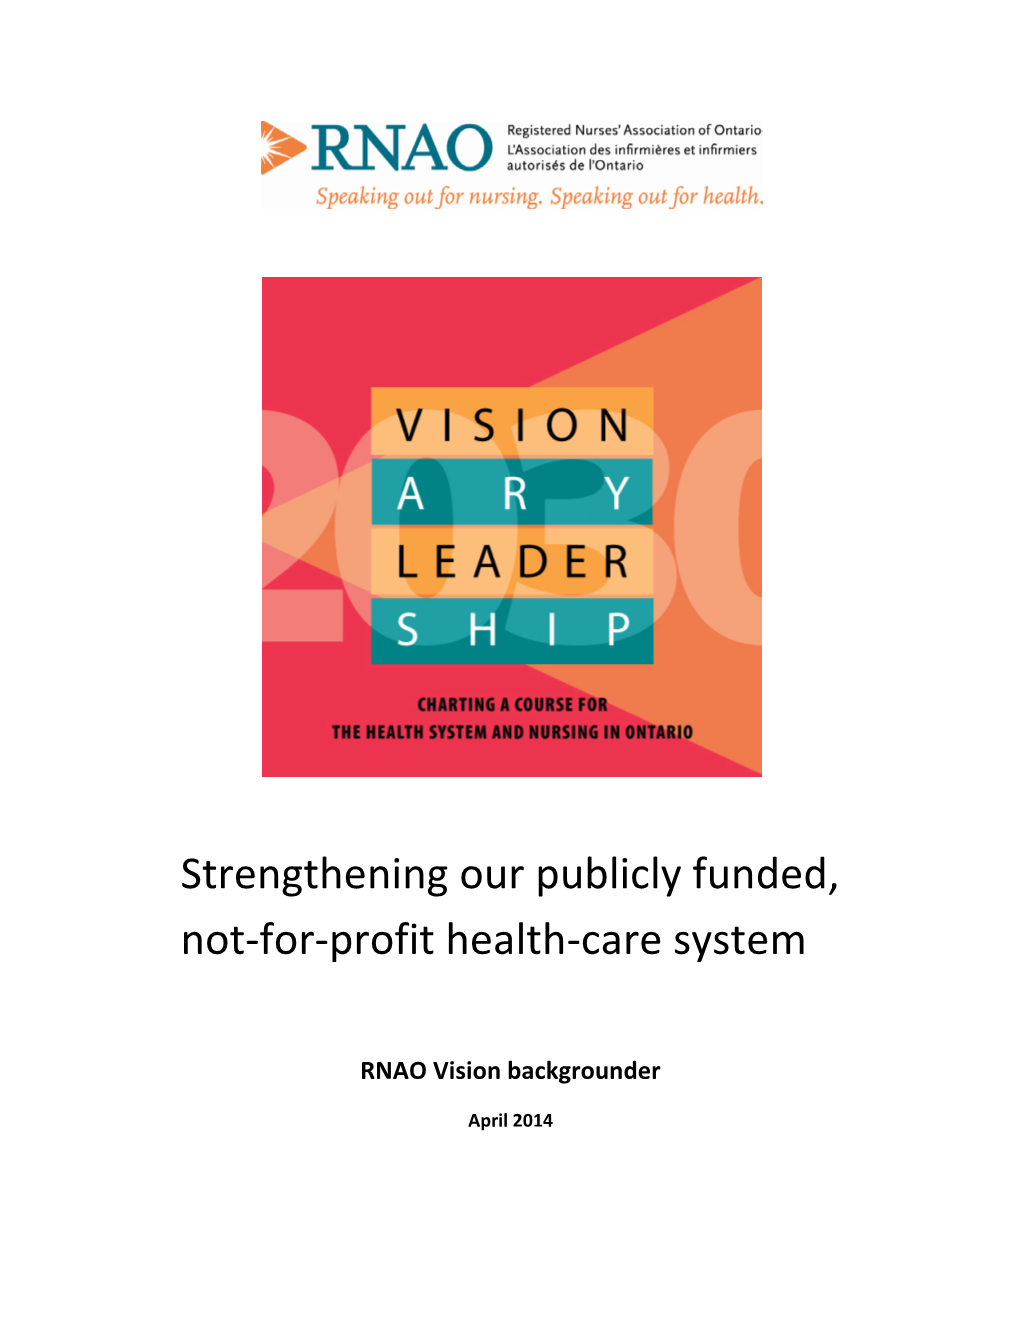 RNAO Vision – Strengthening Our Publicly-Funded, Not-For-Profit Health-Care System